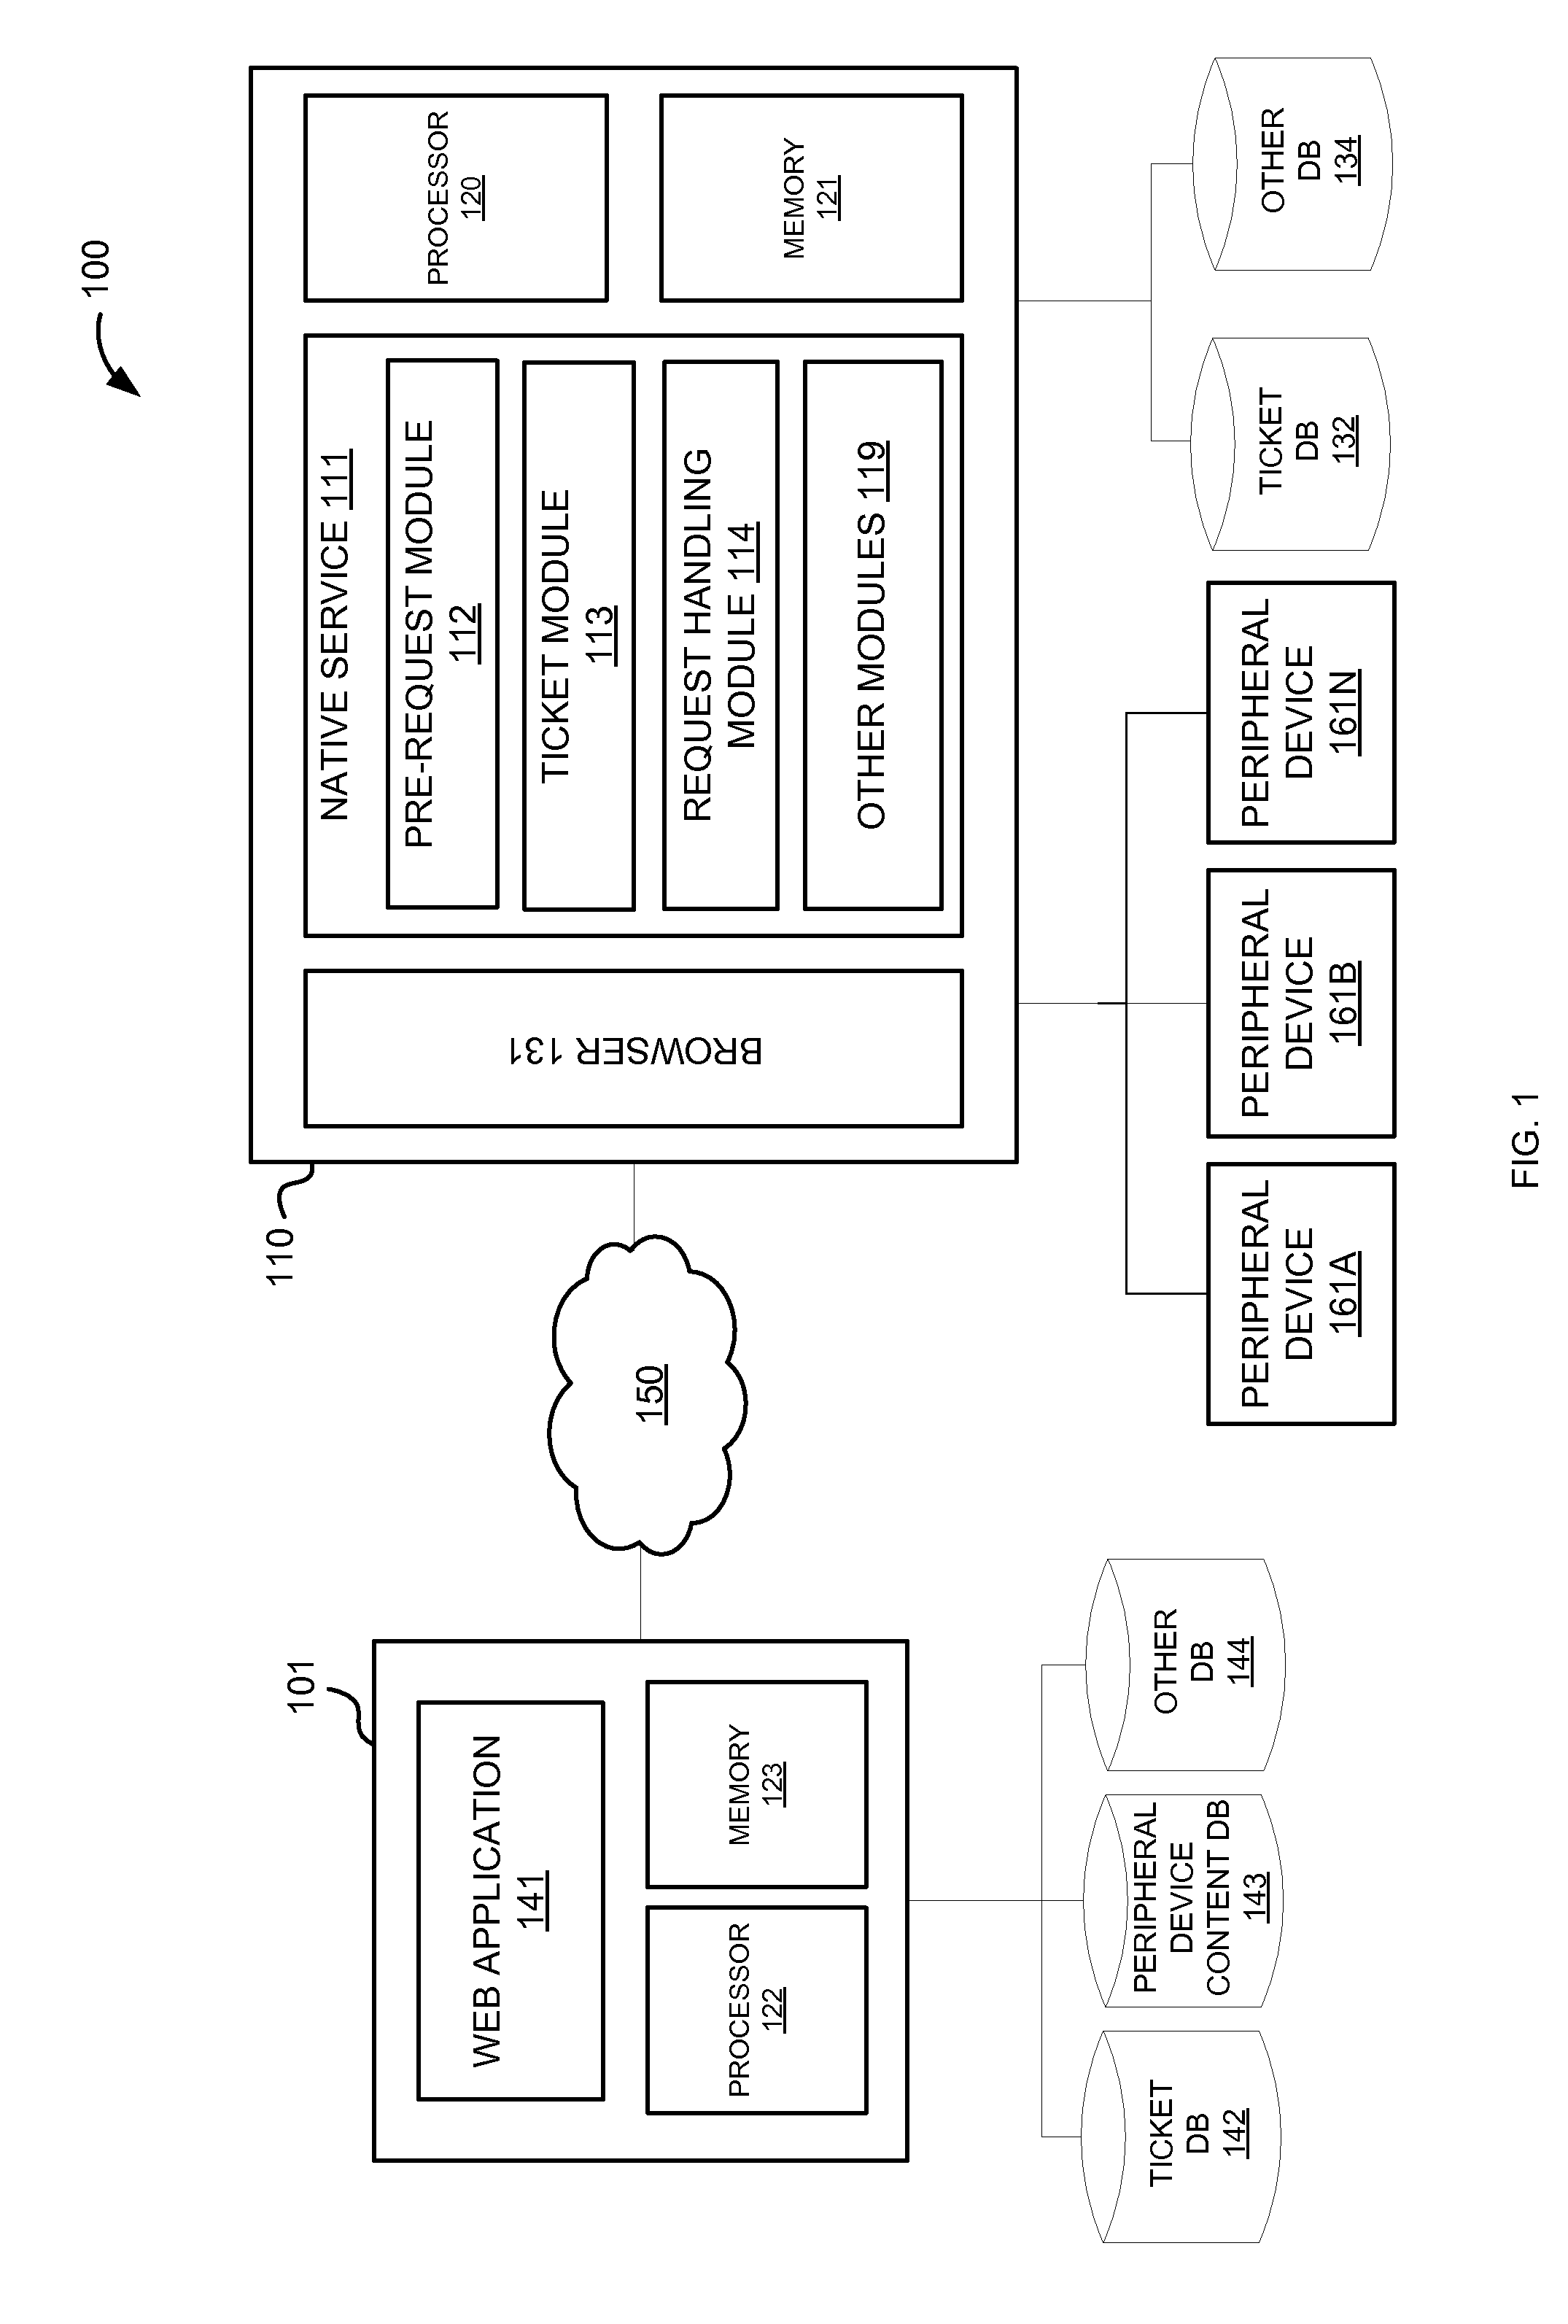 System and method for facilitating communication between a web application and a local peripheral device through a native service